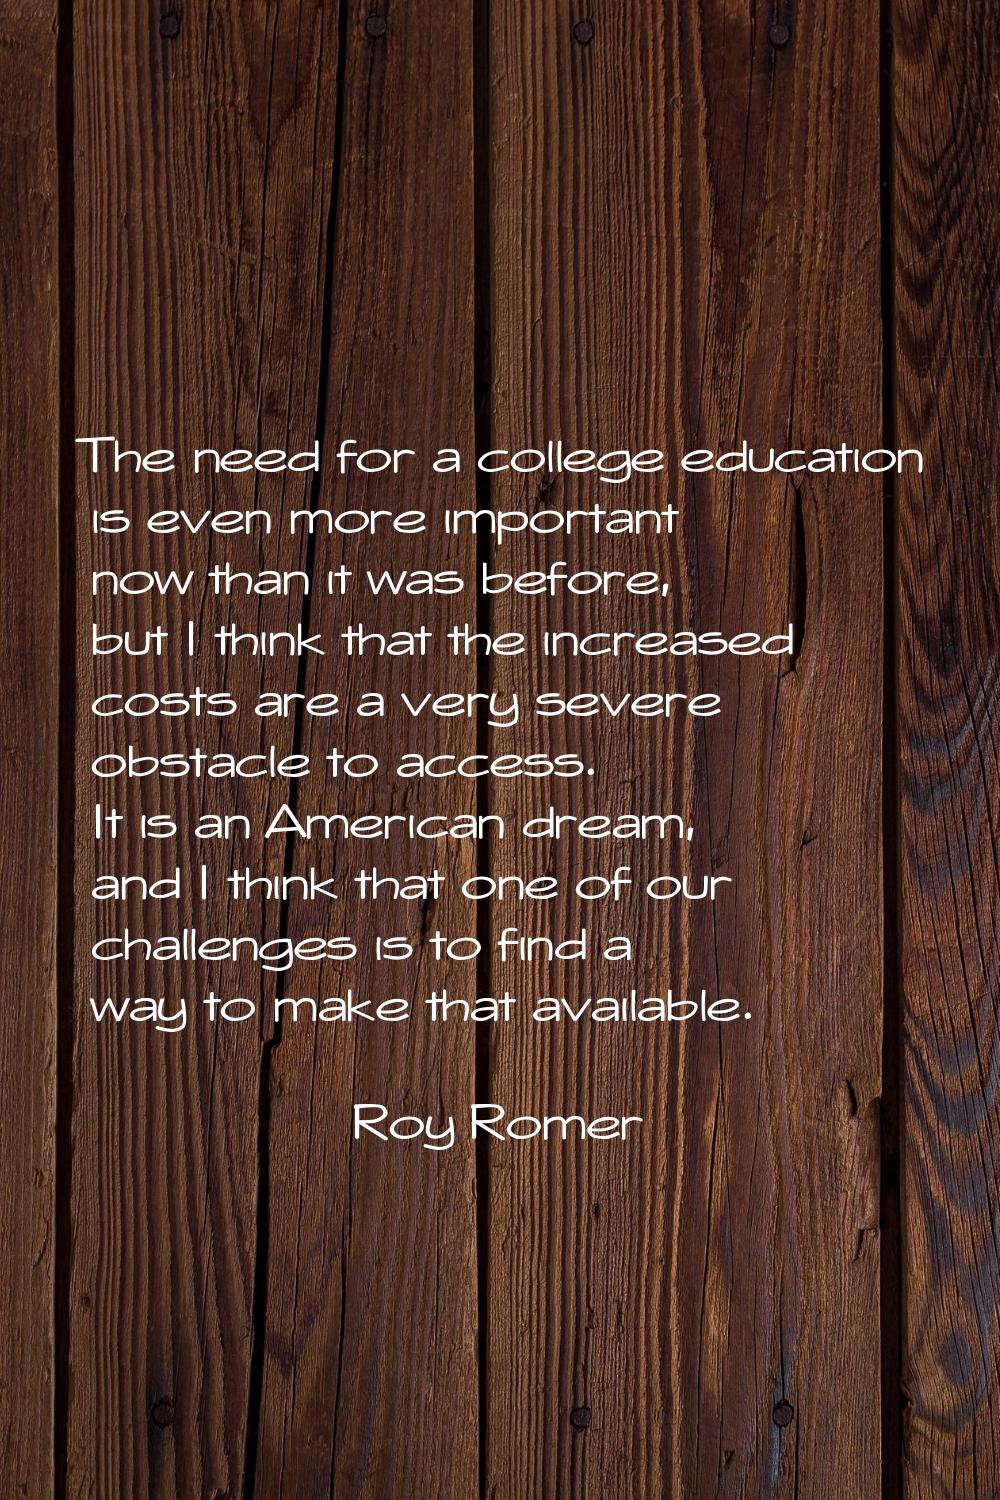 The need for a college education is even more important now than it was before, but I think that th